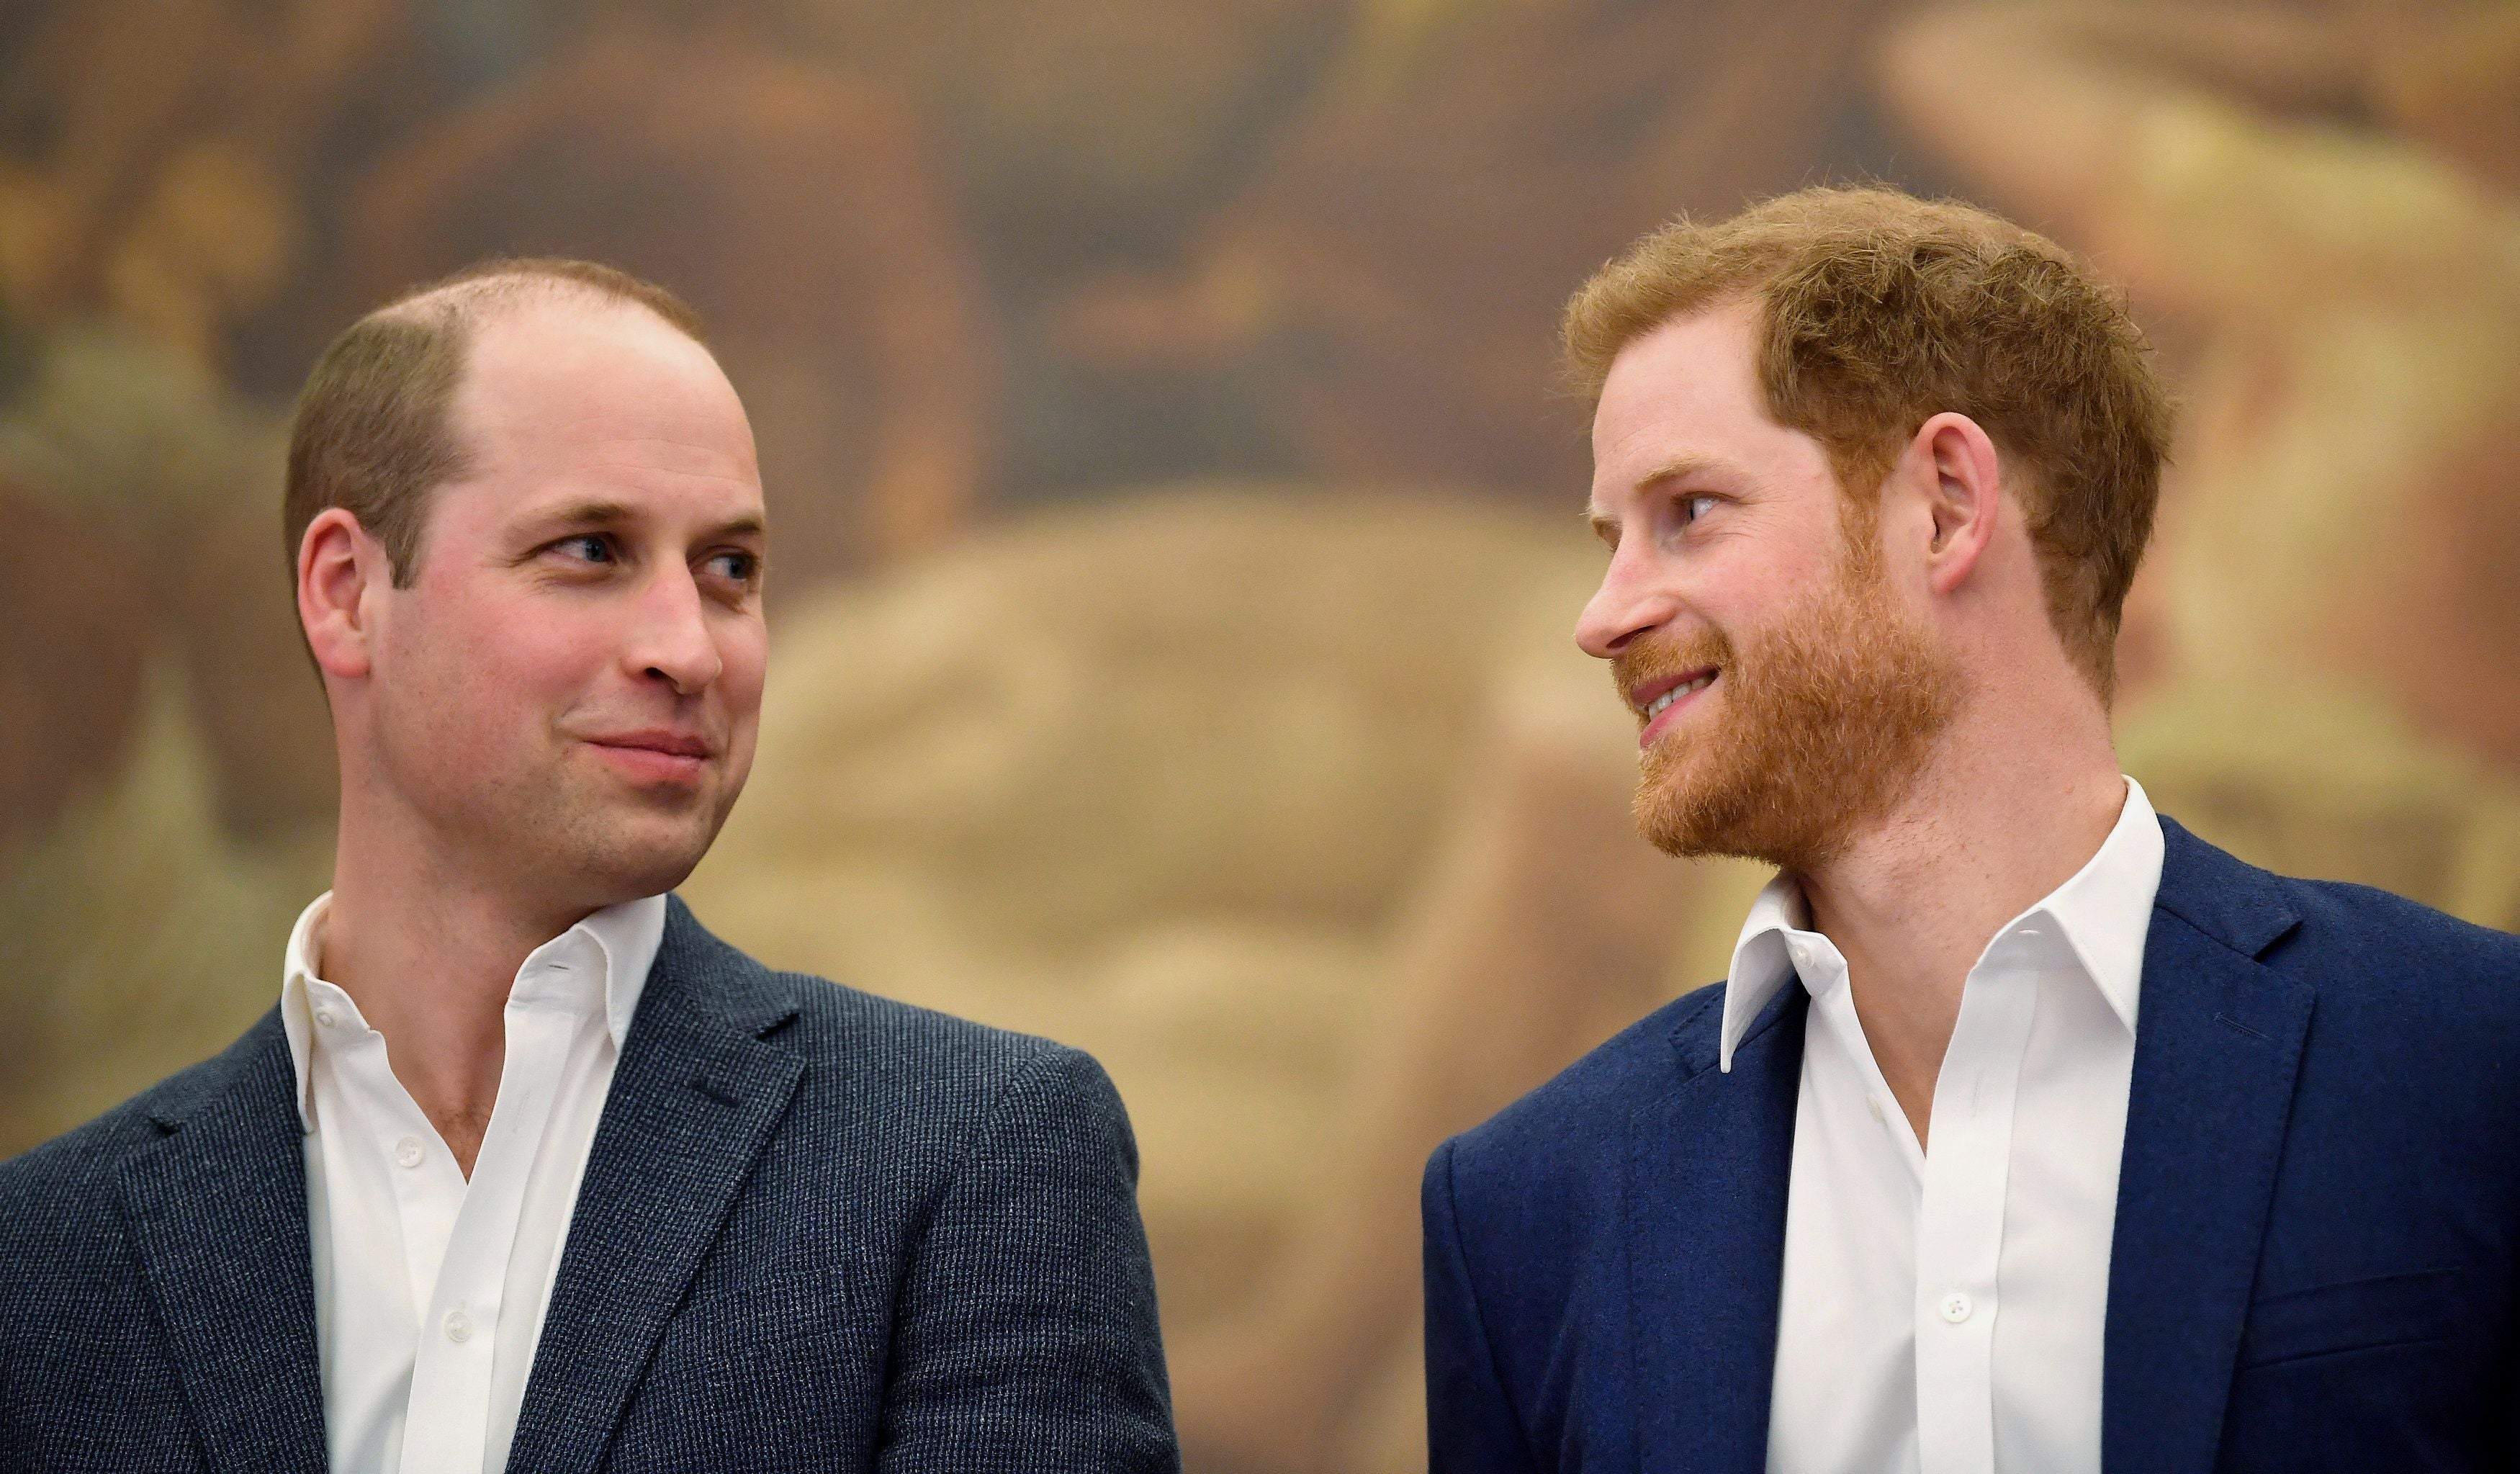 The first episode of the two-part ‘The Princes and the Press’ programme, explored the relationship of the Duke of Cambridge and the Duke of Sussex with the media